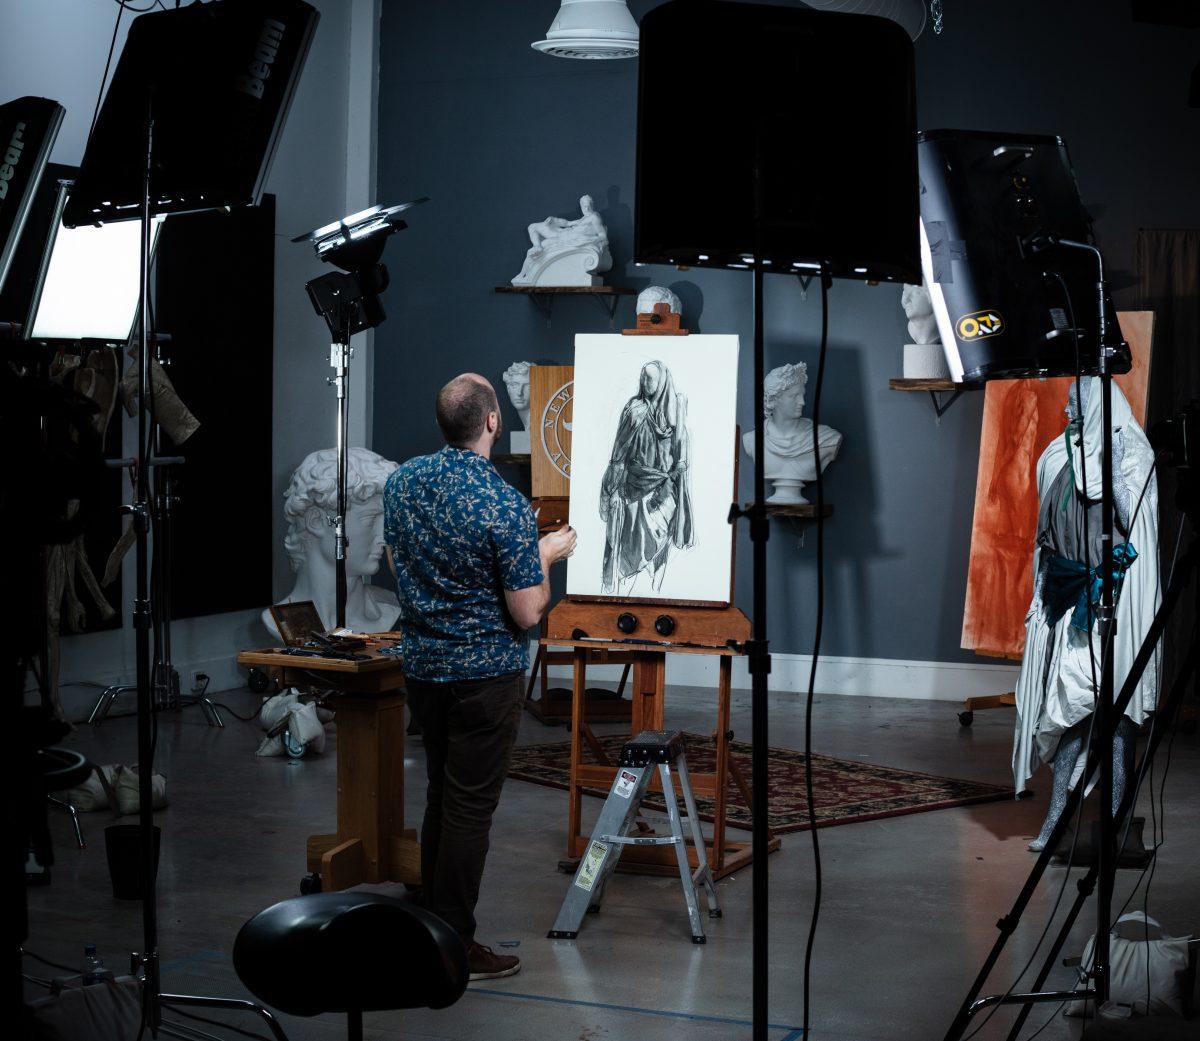 New Masters Academy, shooting a video of art instructor Iliya Mirochnik at work. (New Masters Academy)